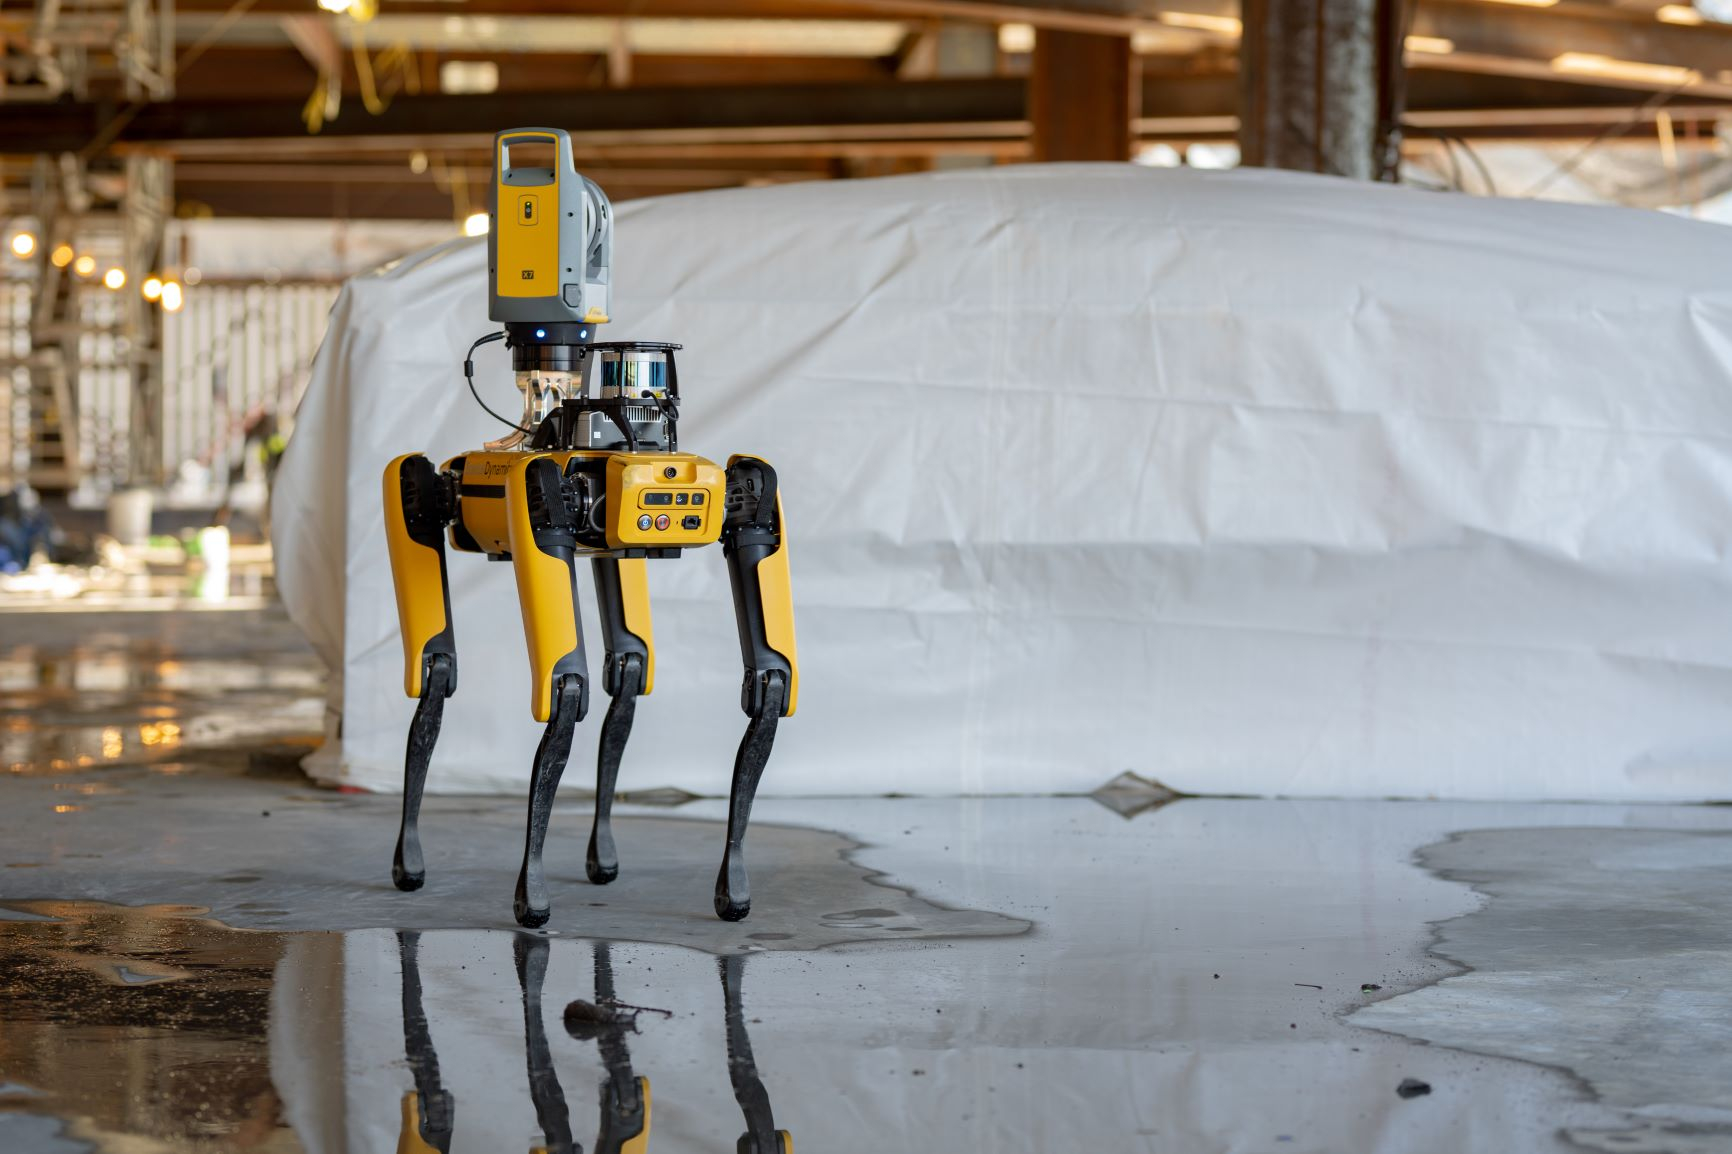 Boston Dynamics selected Velodyne Lidar’s sensors to provide perception and navigation capabilities for its highly mobile robots, which are capable of tackling the toughest robotics challenges. Pictured here: Boston Dynamics’ Spot mobile robot equipped with a Velodyne lidar sensor. (Photo: Boston Dynamics)